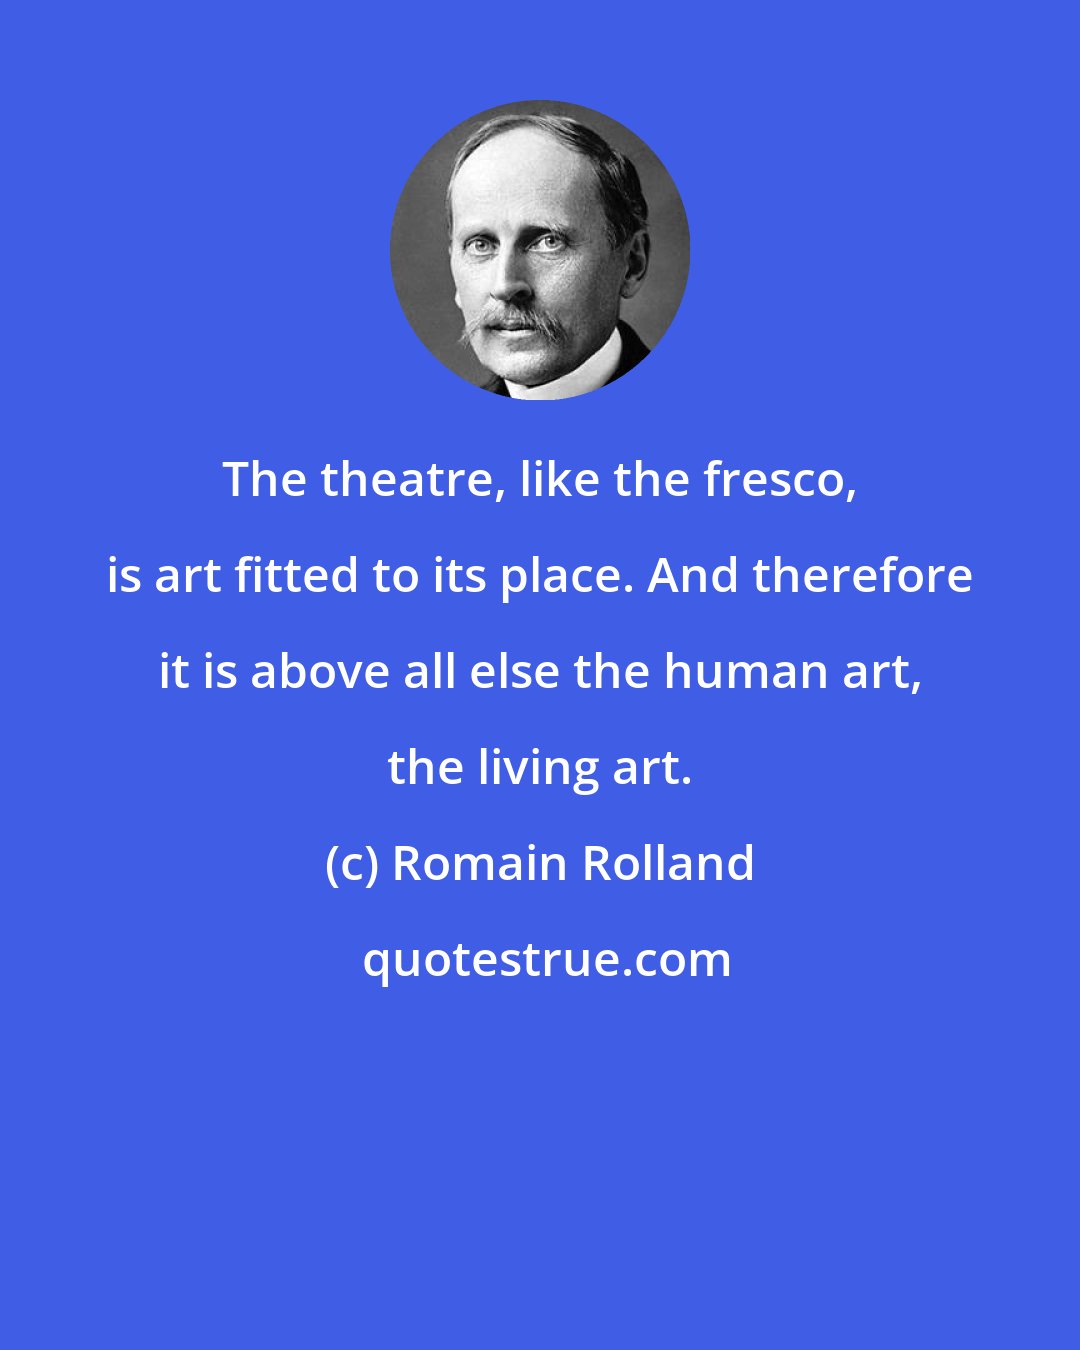 Romain Rolland: The theatre, like the fresco, is art fitted to its place. And therefore it is above all else the human art, the living art.